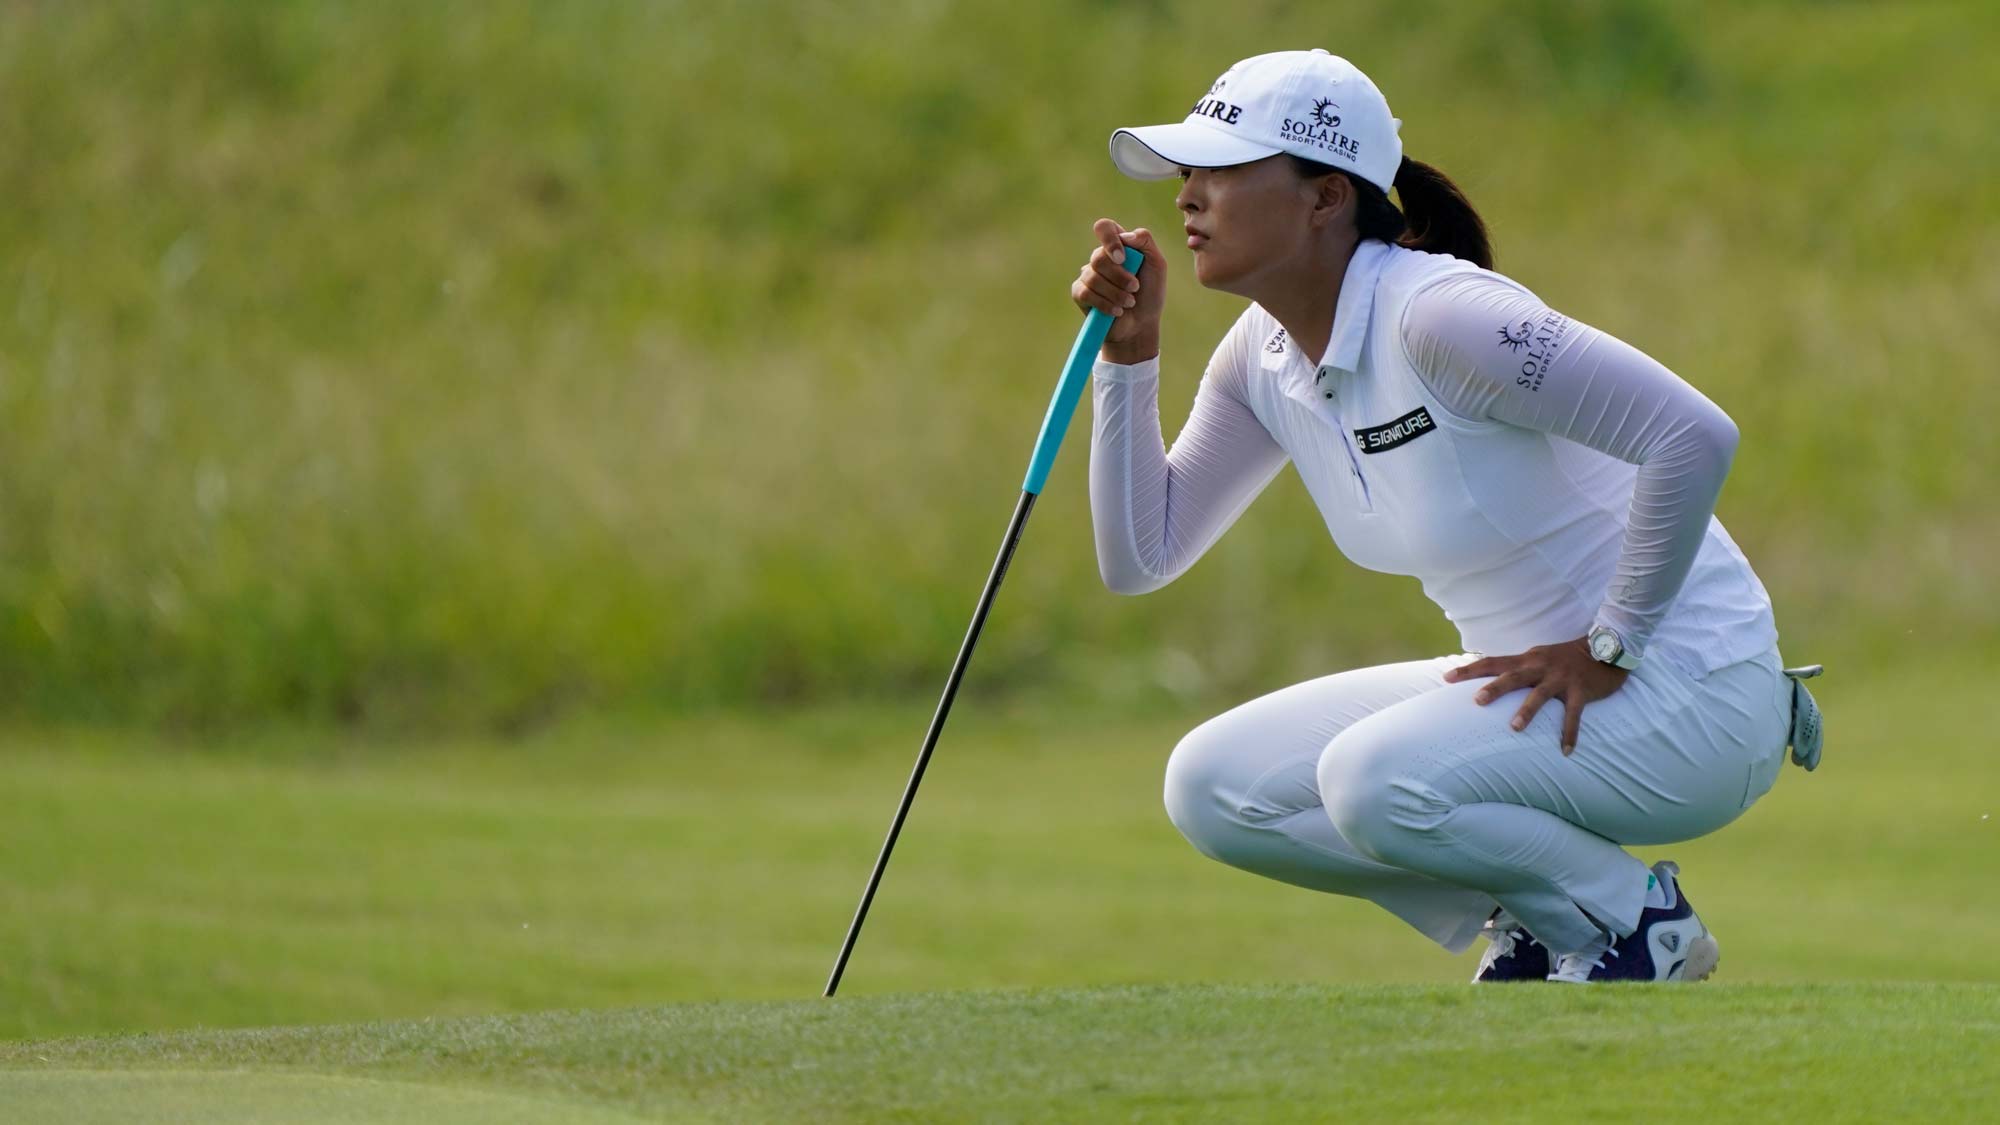 Jin Young Ko of Korea lines up a putt on the second hole during the third round of the Volunteers of America Classic